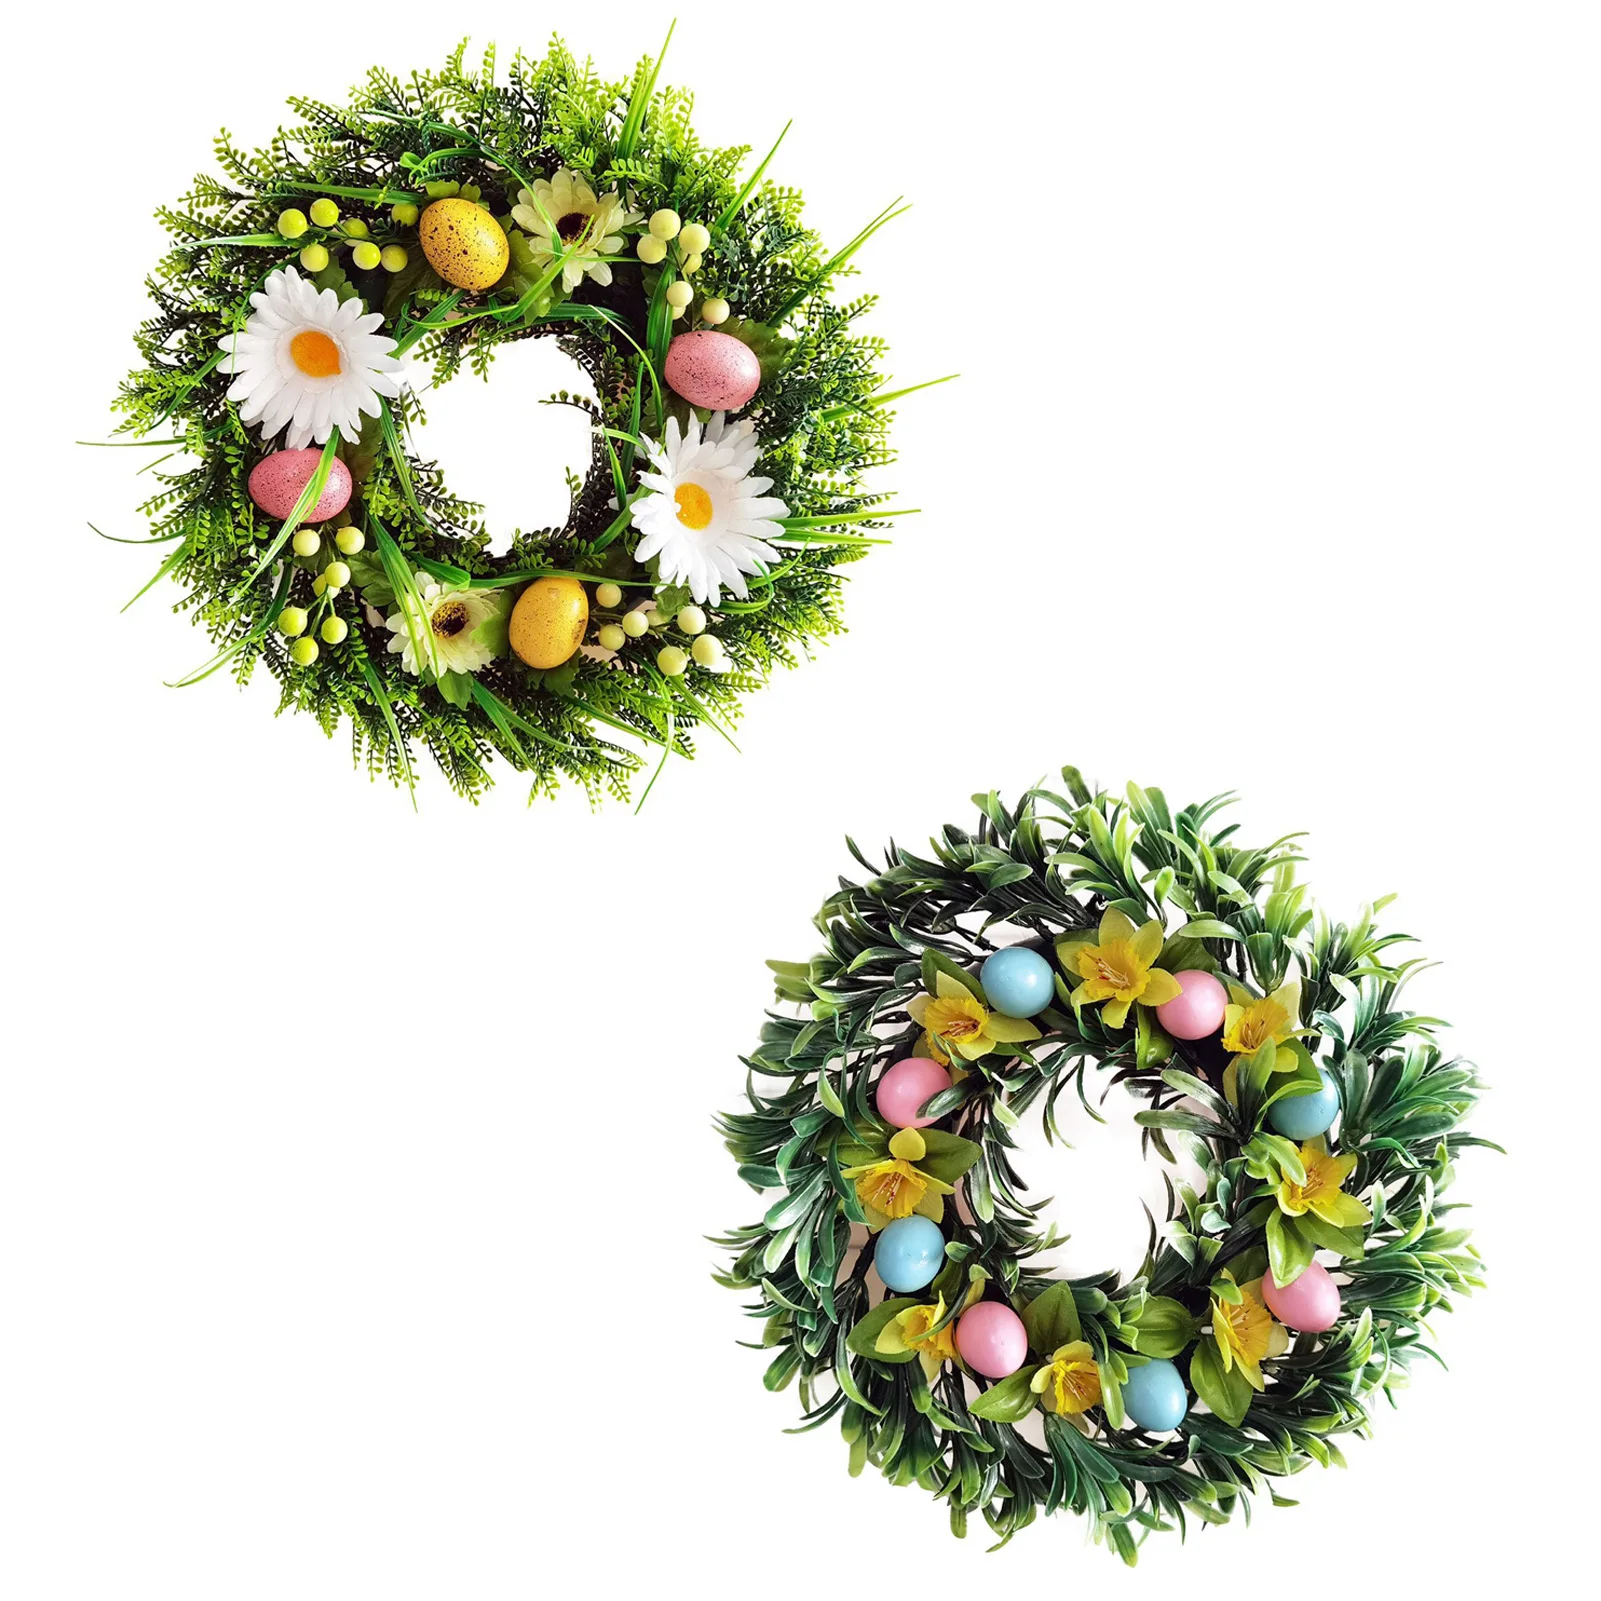 

Easter Wreath with Colorful Eggs Spring Easter Wreath with Daisy Flowers for Front Door Wall Window Holiday Decor